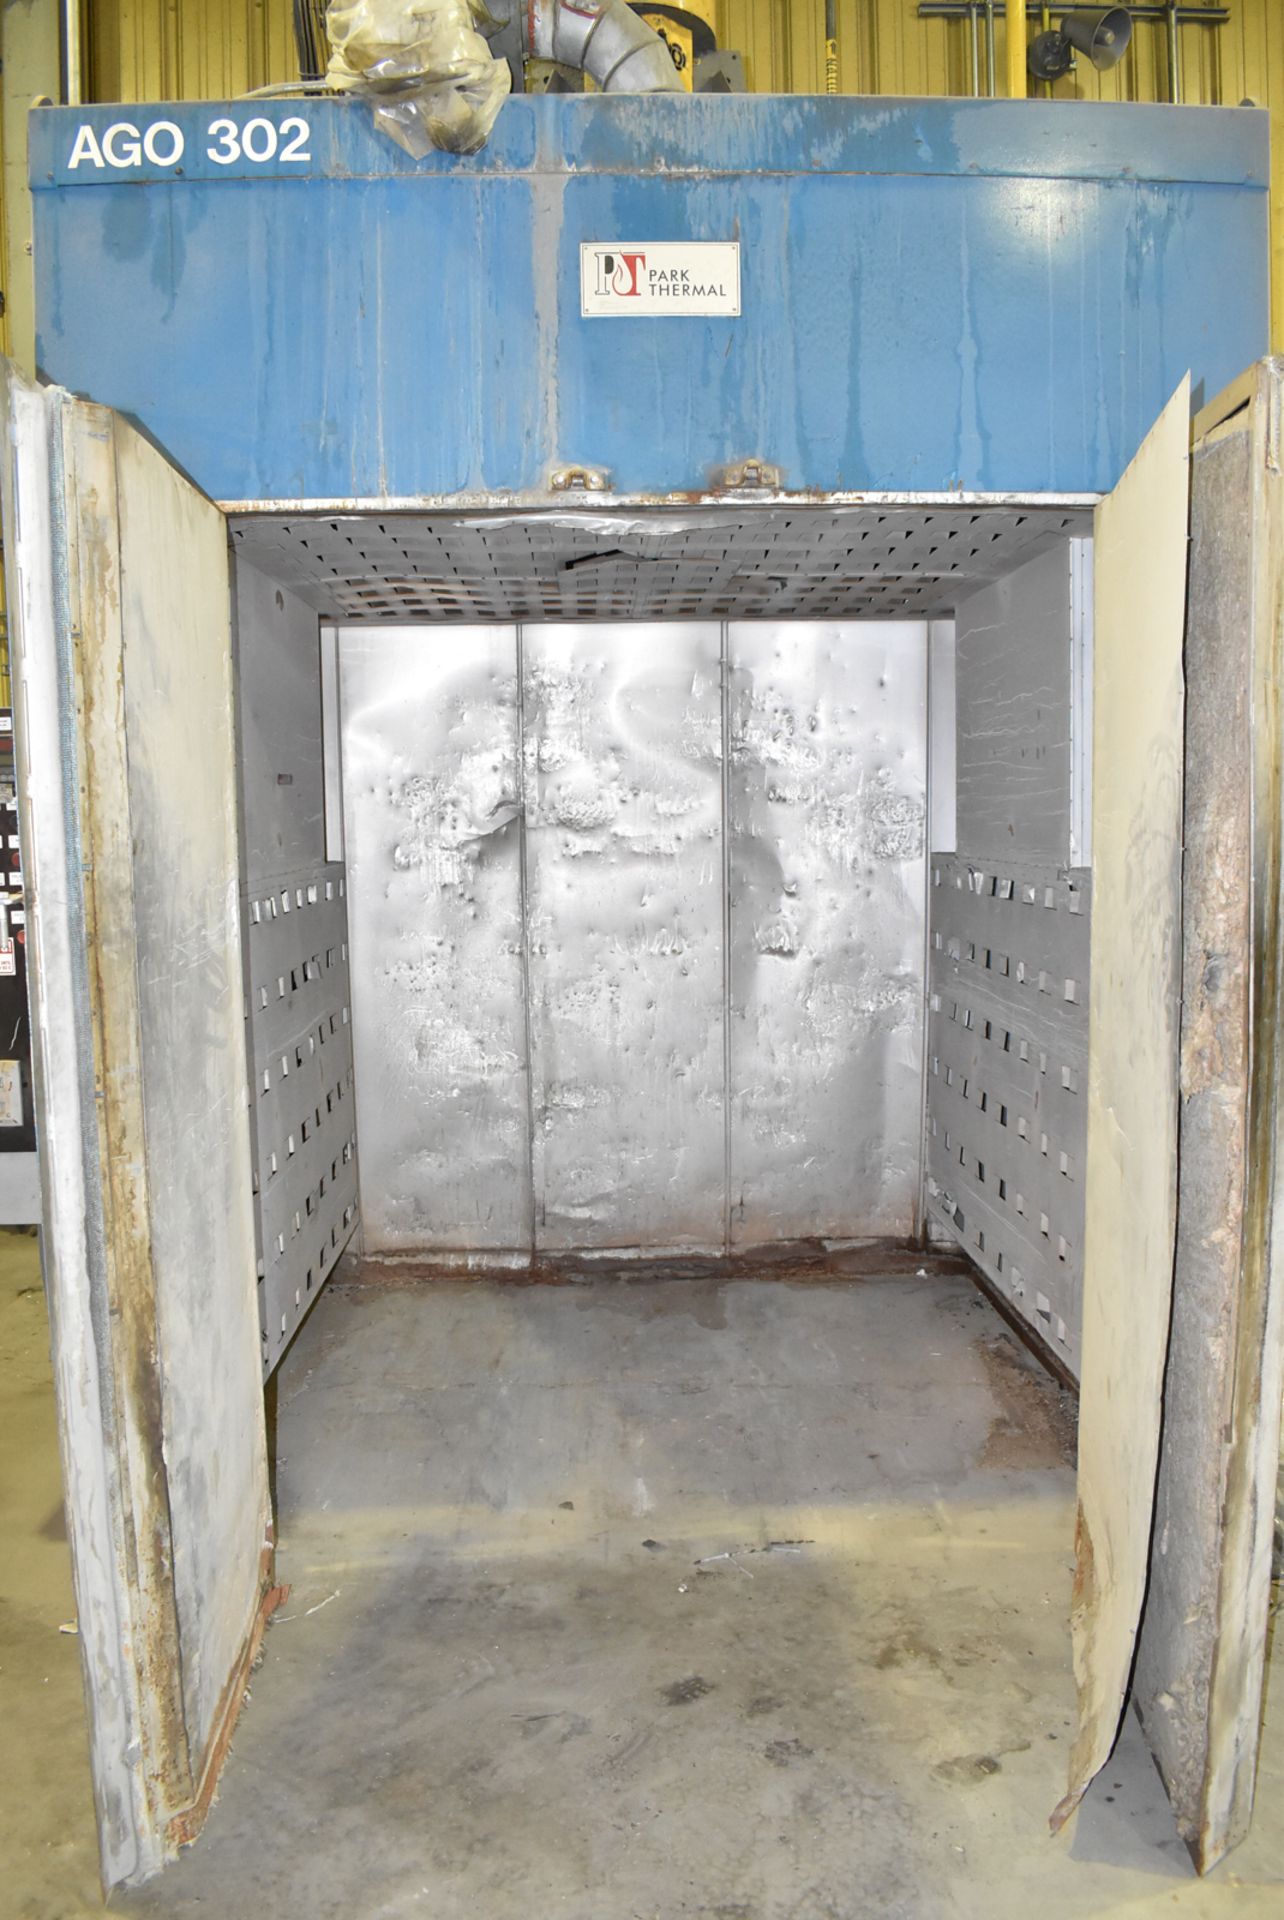 PARK THERMAL BATCH AGE OVEN NATURAL GAS FIRED AGING OVEN 6' X 7' OPENING, 6' X 6'X 7' HIGH WITH - Image 3 of 3